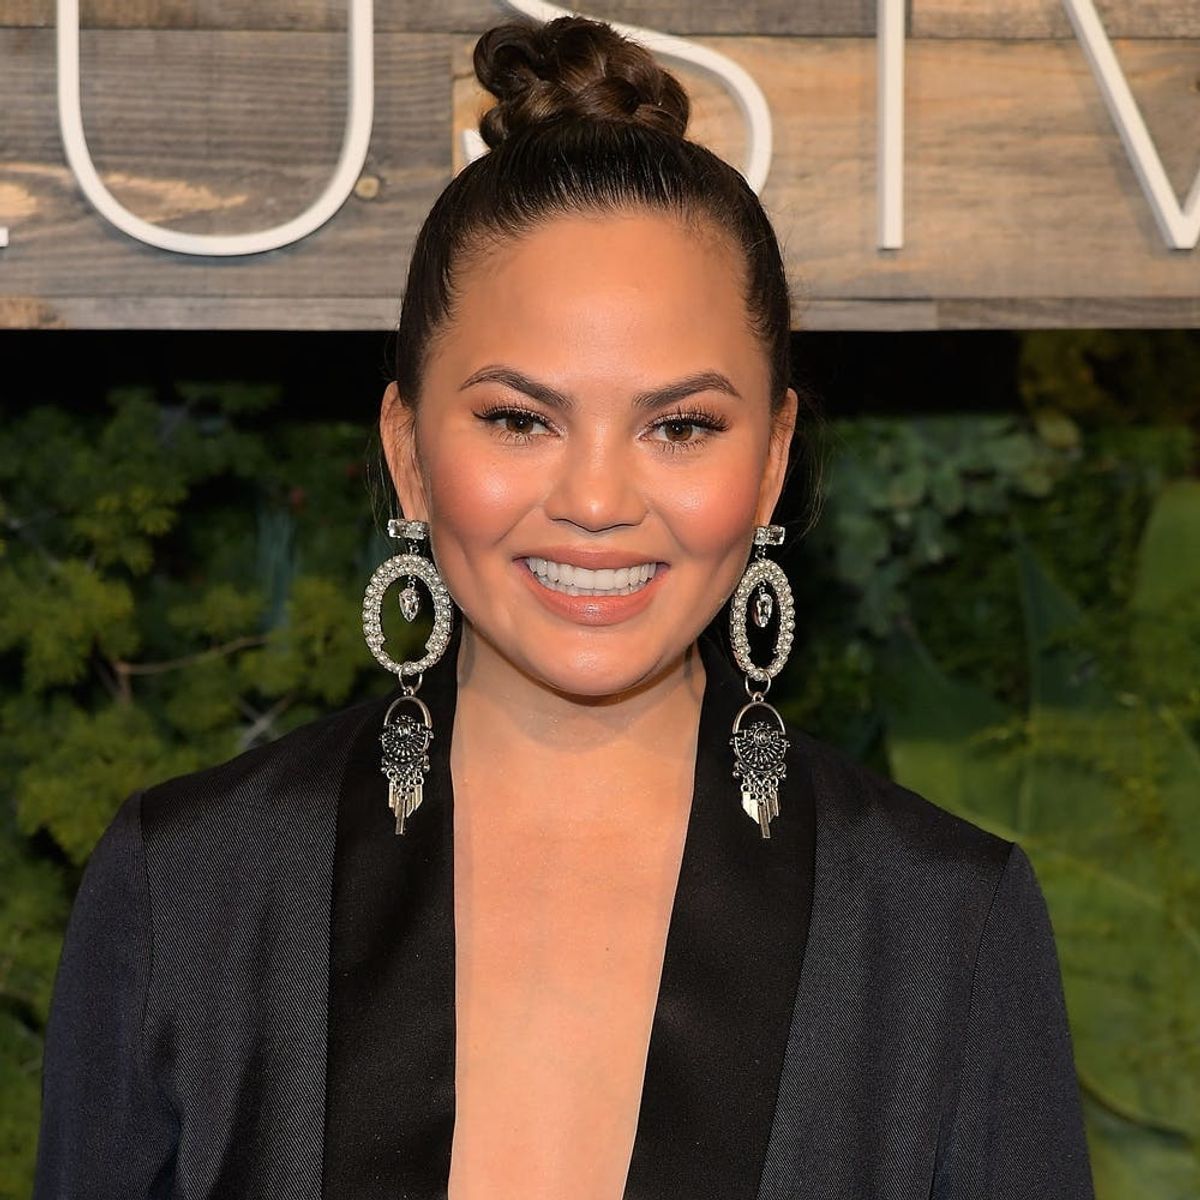 See the Pretty DIY Cake Chrissy Teigen Made to Prep for Luna’s First Birthday